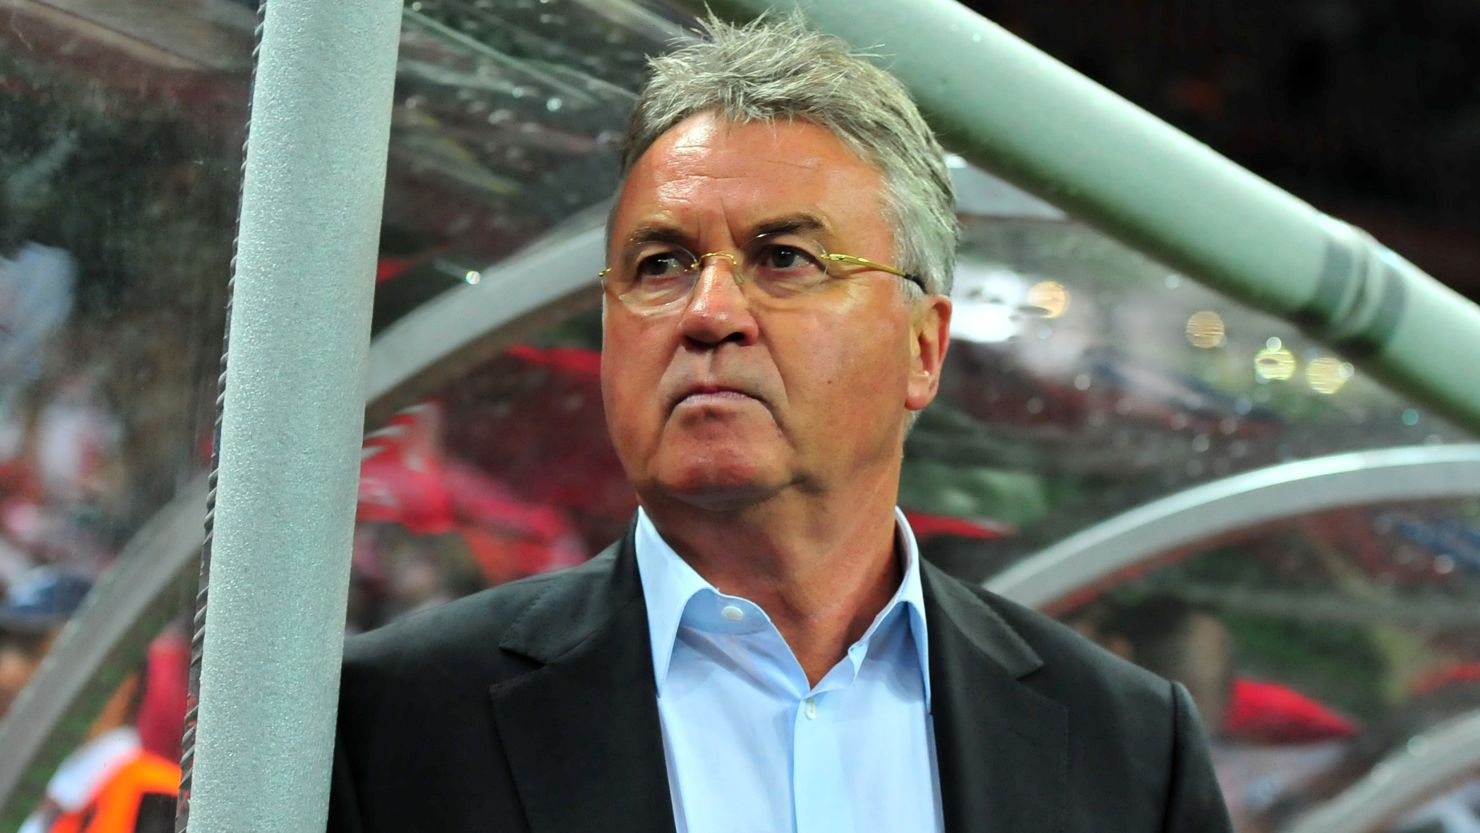 Guus Hiddink will return to international football by taking up the role of Dutch coach after World Cup in Brazil.